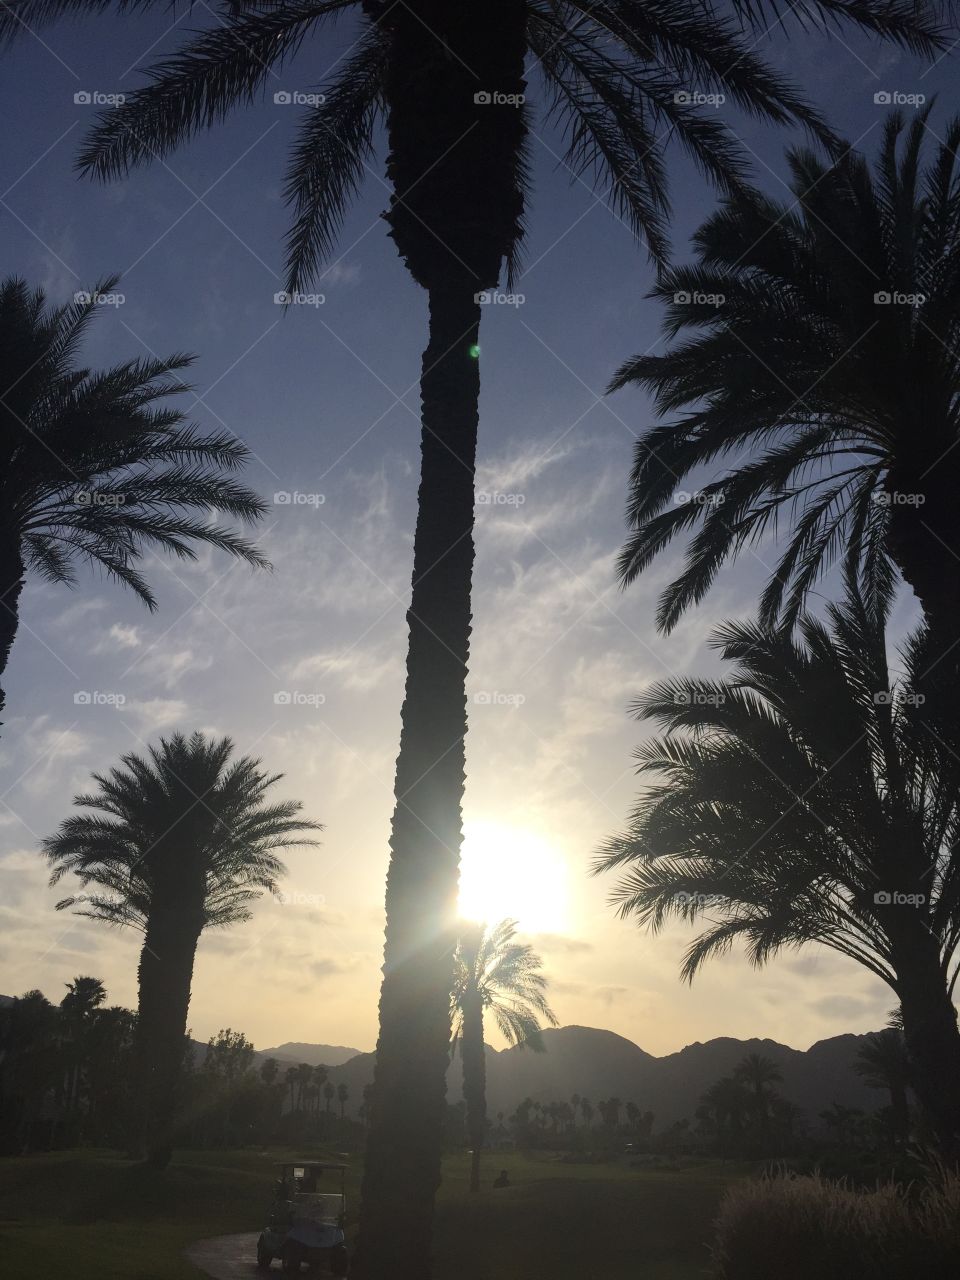 palm trees in Palm Springs